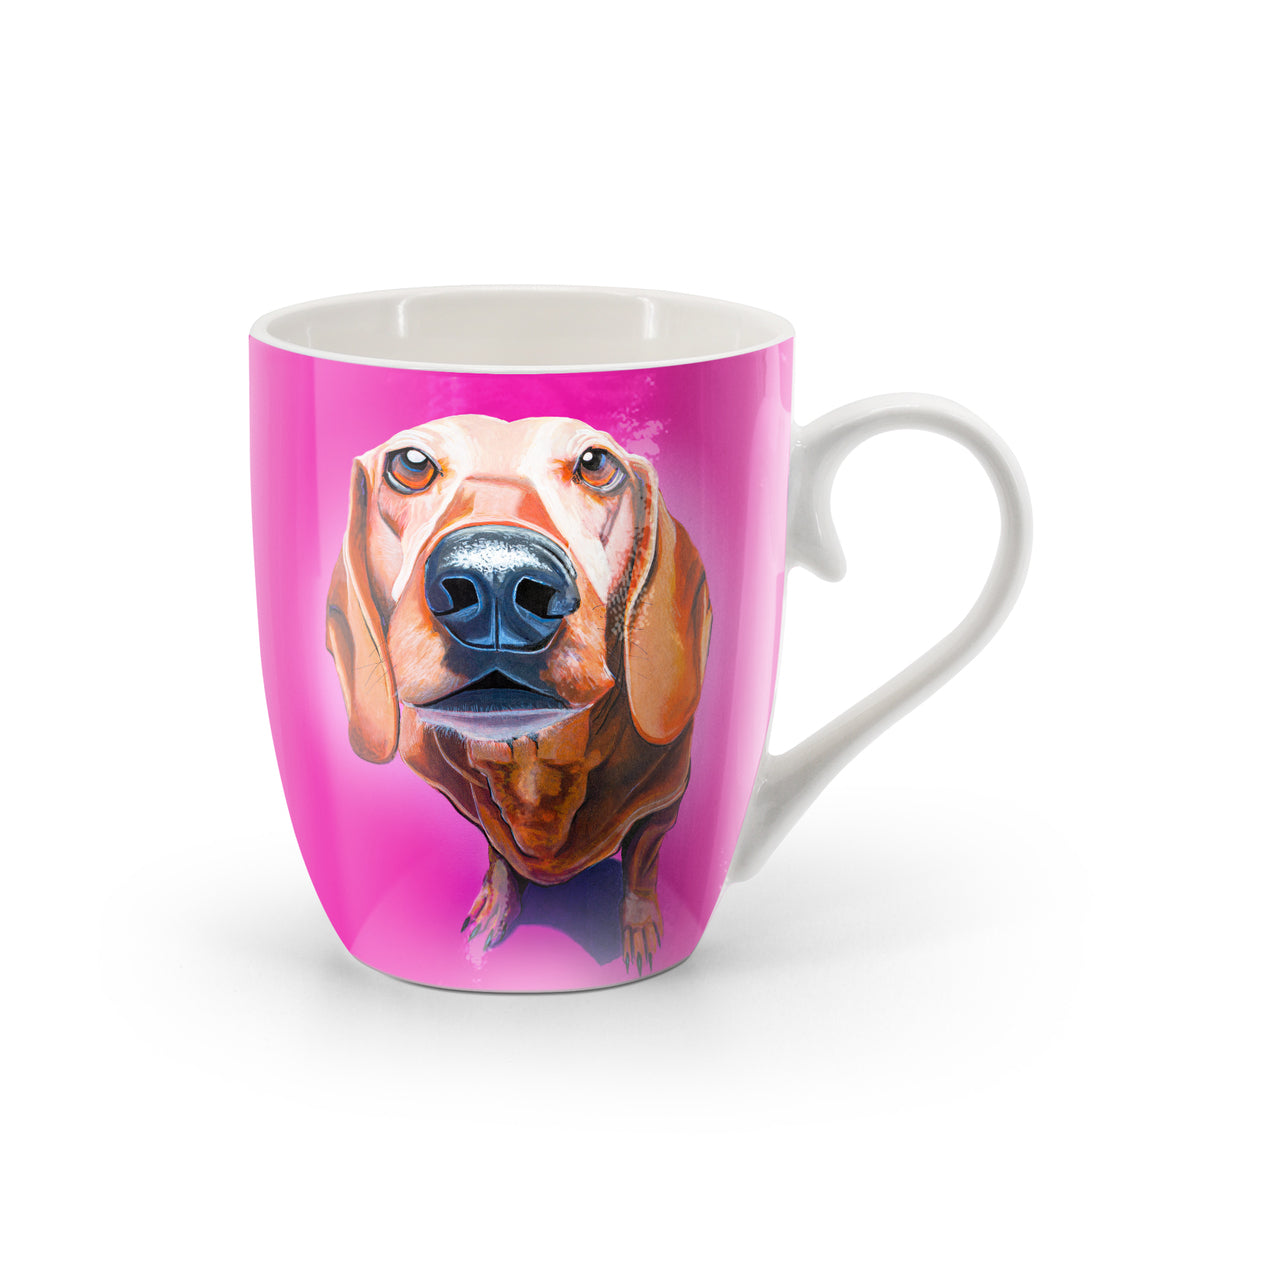 Eoin O'Connor Mutz Mug - Puppy Love   Tipperary Crystal are delighted to present the Mutz Collection Irish artist Eoin O'Connor.